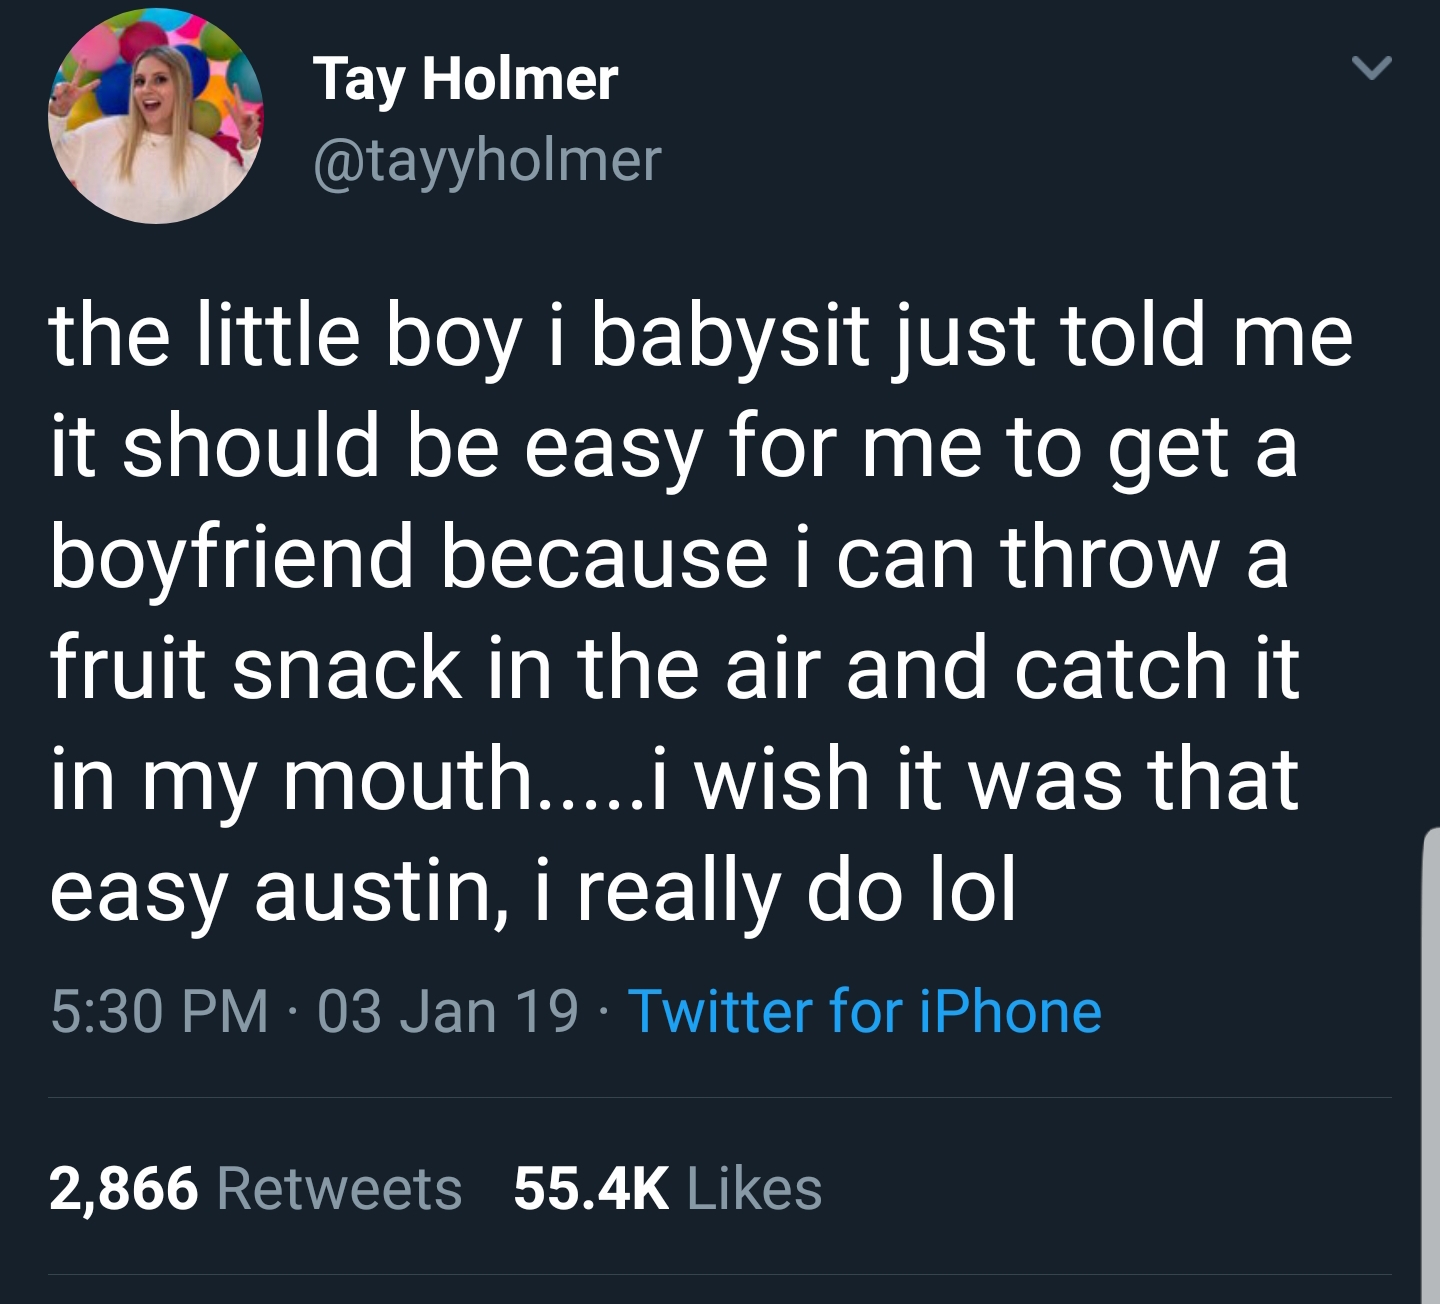 sky - Tay Holmer the little boy i babysit just told me it should be easy for me to get a boyfriend because i can throw a fruit snack in the air and catch it in my mouth....i wish it was that easy austin, i really do lol 03 Jan 19. Twitter for iPhone 2,866